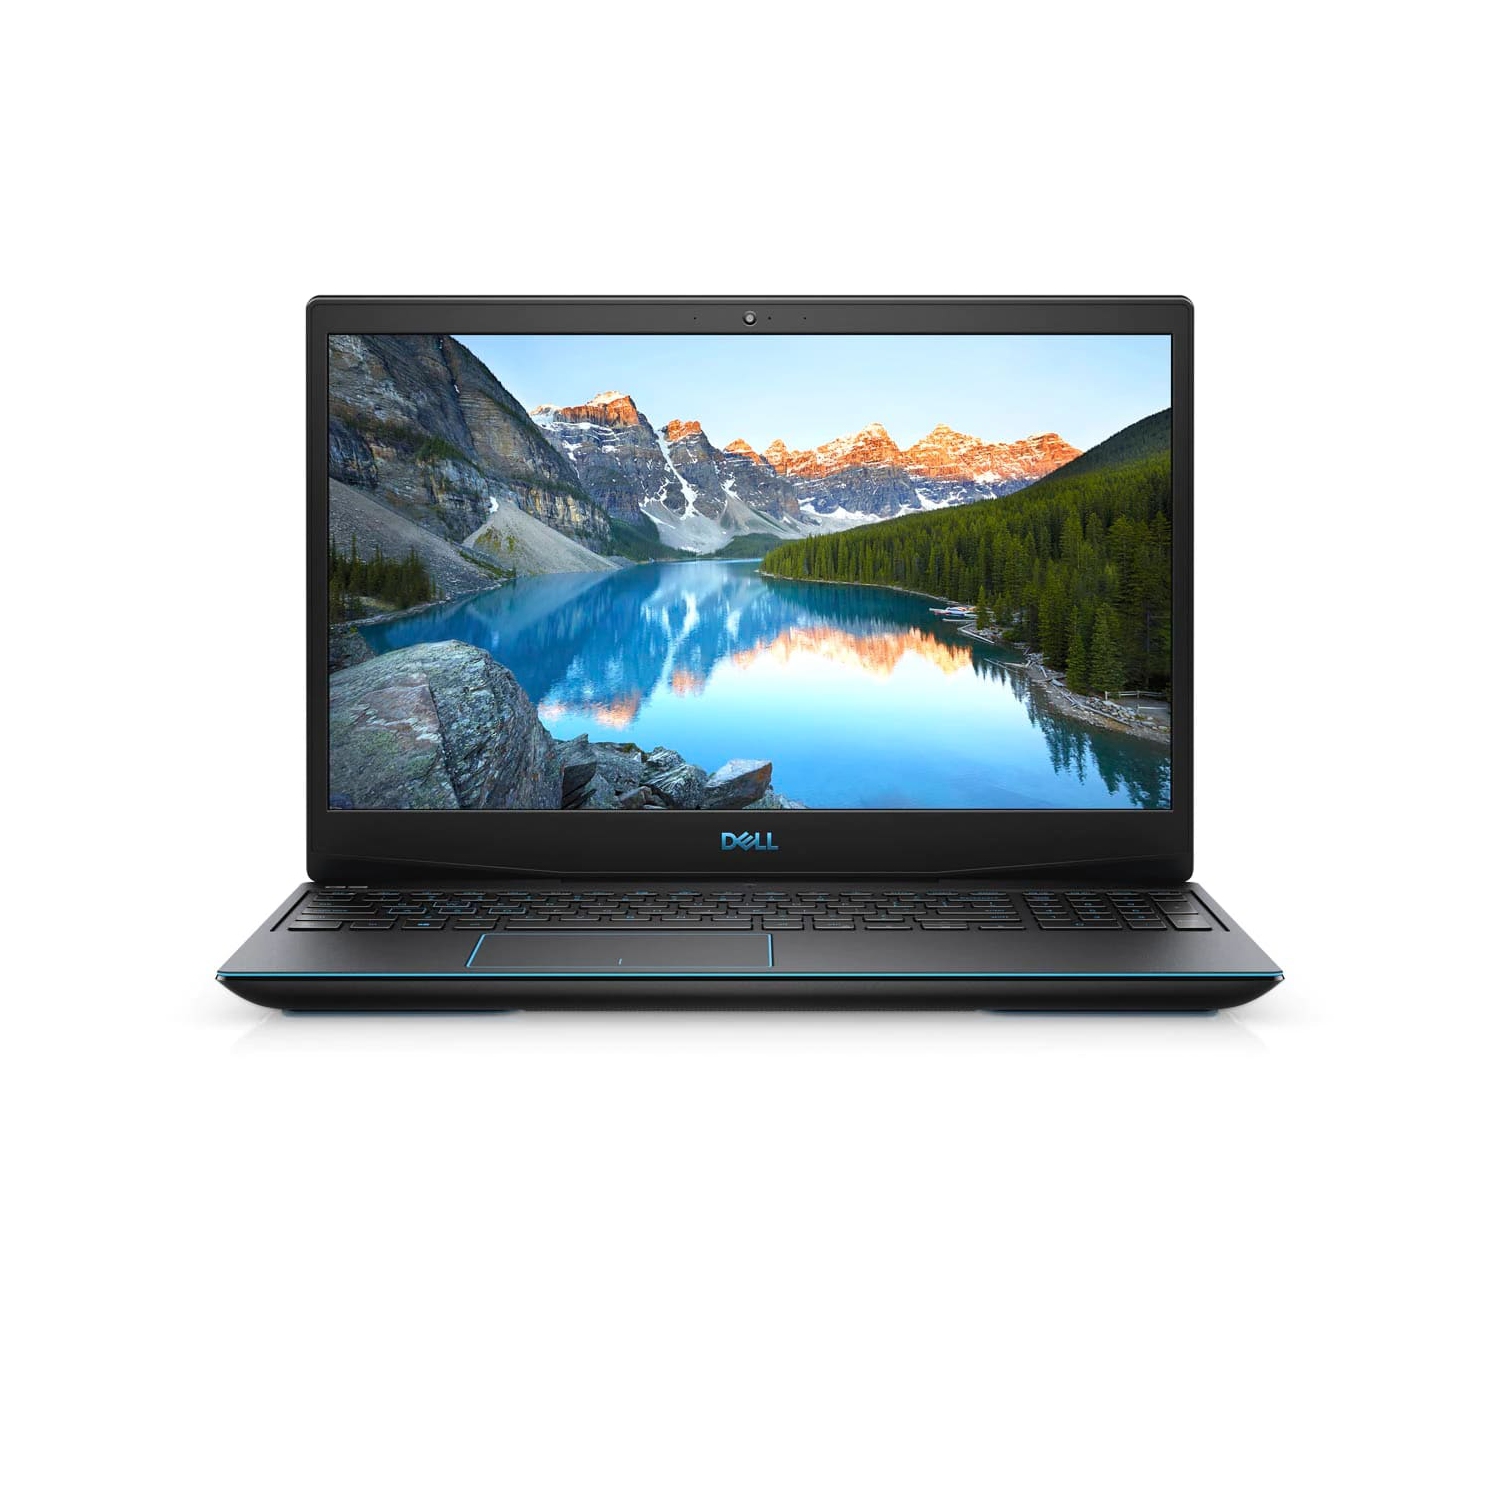 Refurbished (Excellent) - Dell G3 15 3590 Gaming Laptop (2019) | 15.6" FHD | Core i7 - 1TB HDD + 128GB SSD - 16GB RAM - 1660 Ti | 6 Cores @ 4.5 GHz Certified Refurbished